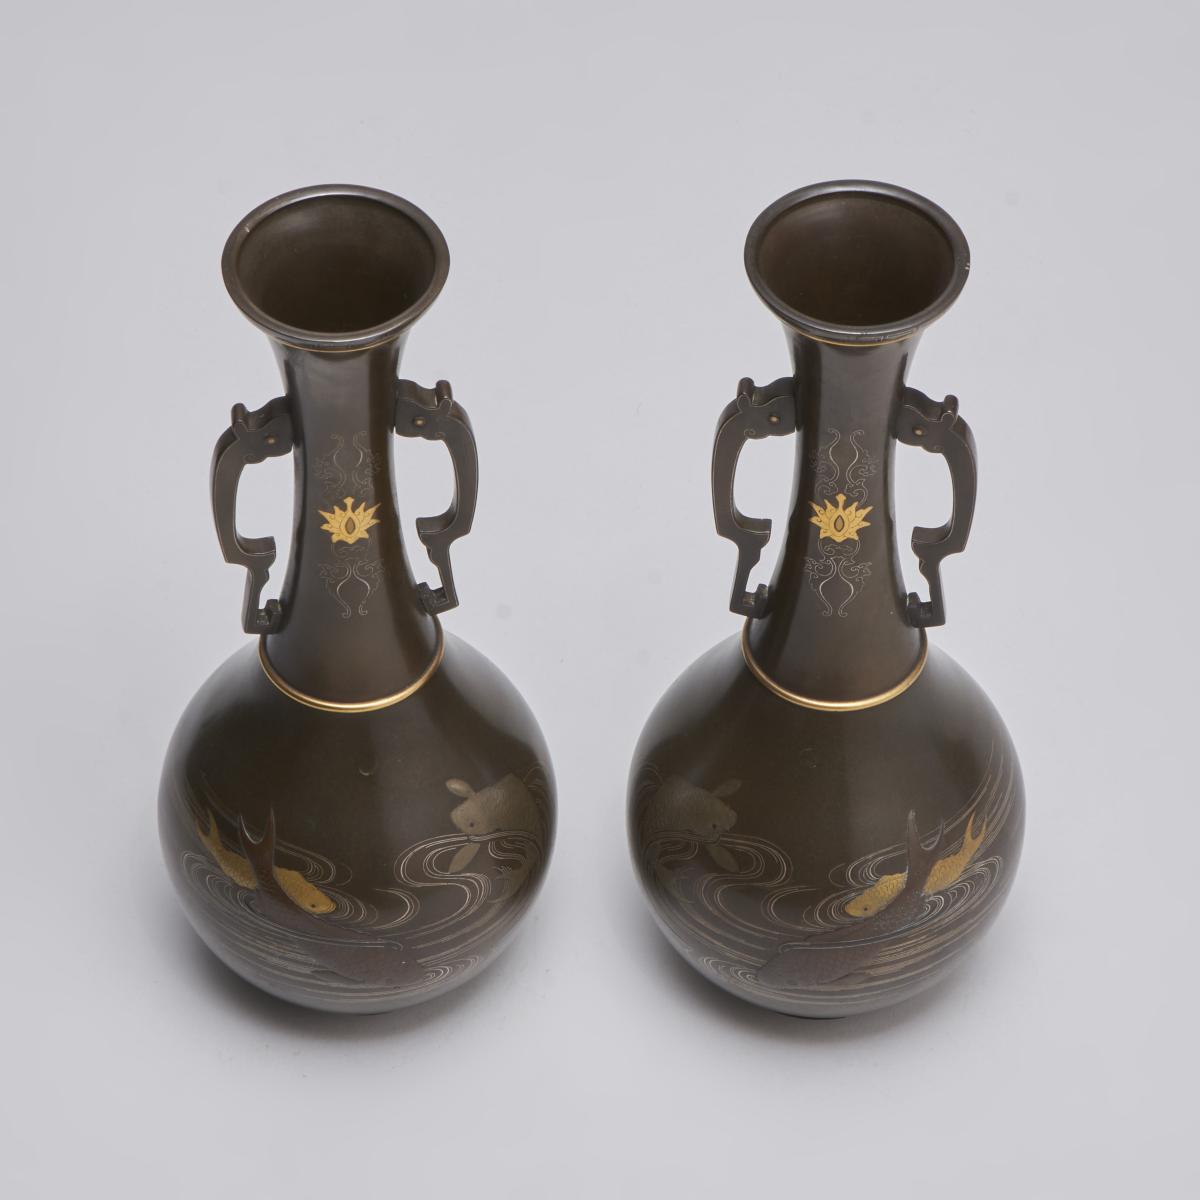 An attractive pair of inlaid Japanese Bronze bottle vases with Koi Carp decoration (Circa 1880)